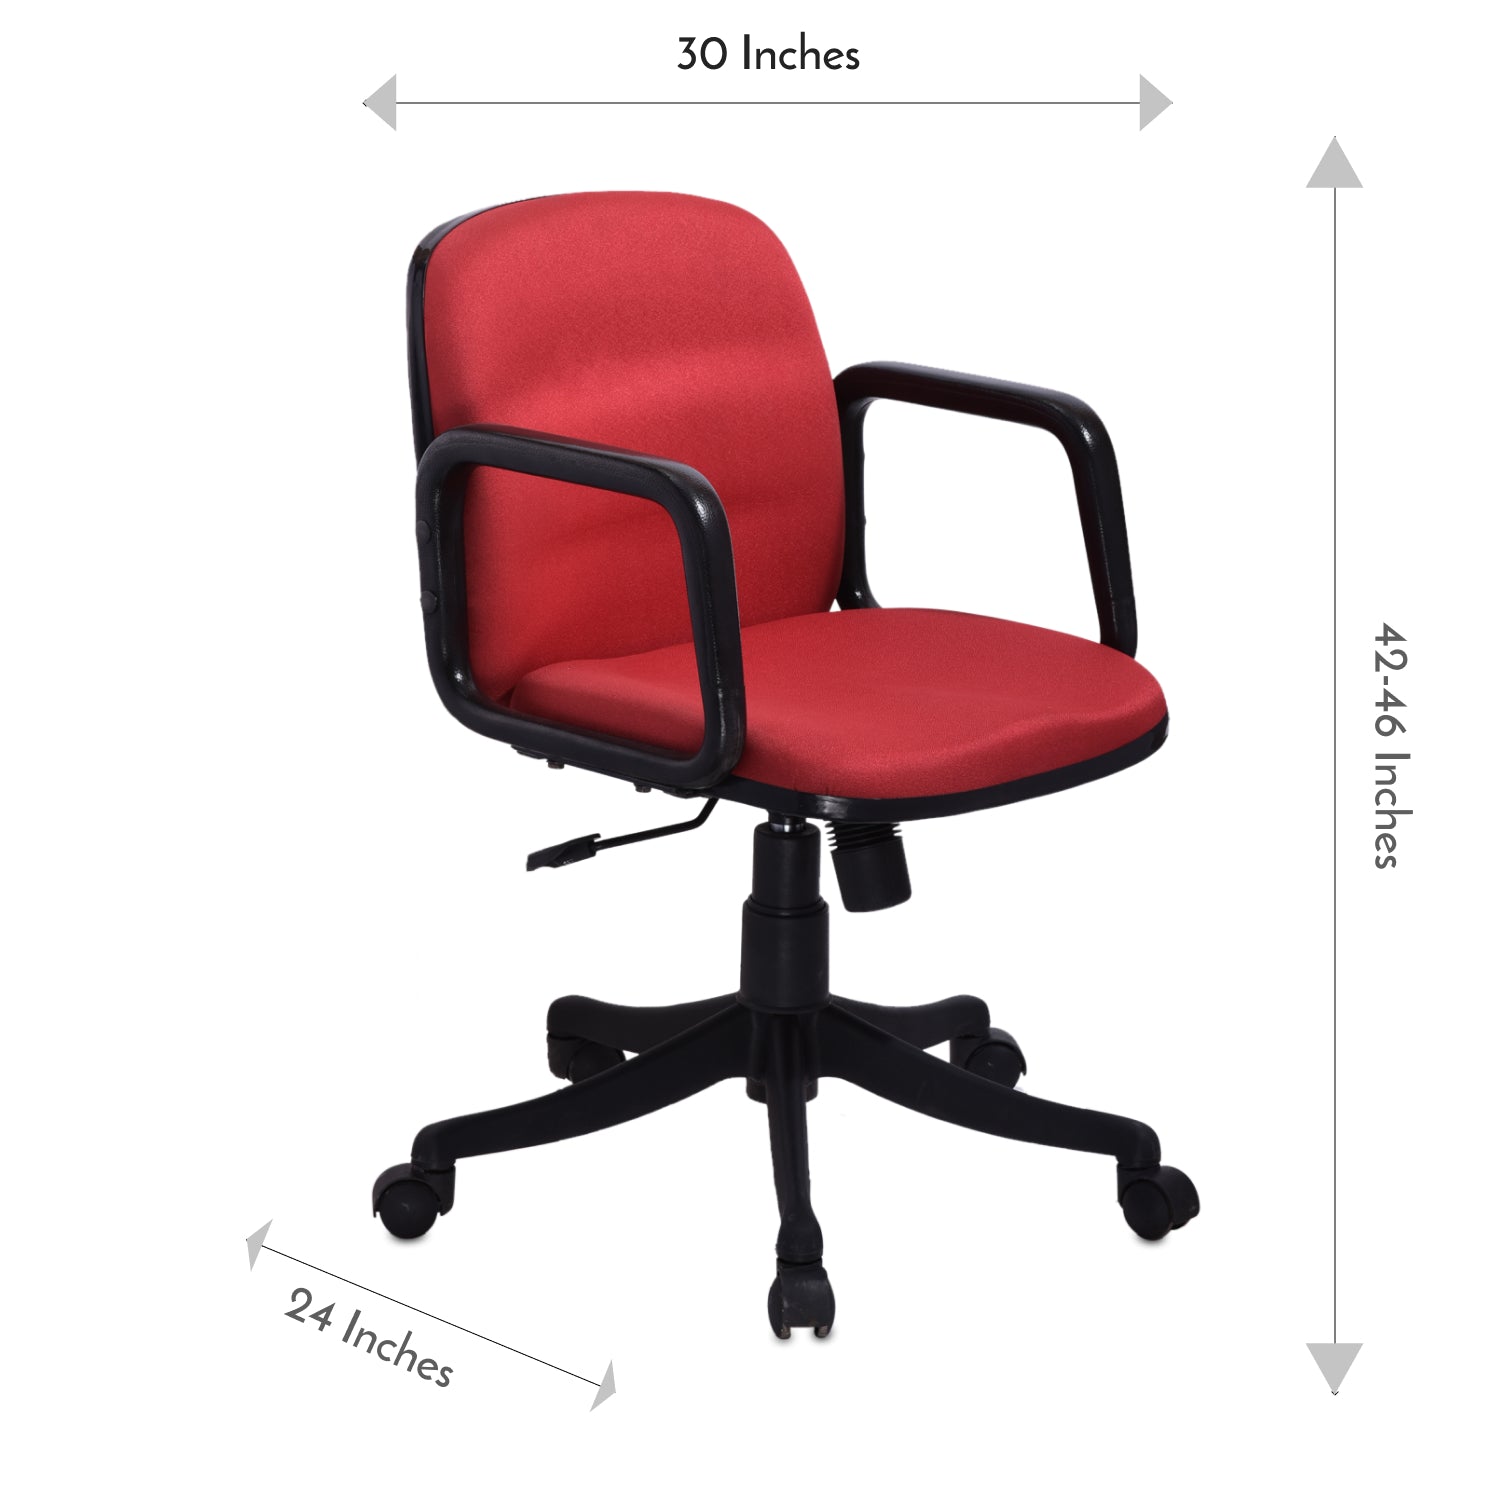 ZSE1024 Medium Back Chair by Zorin in Red Color Zorin